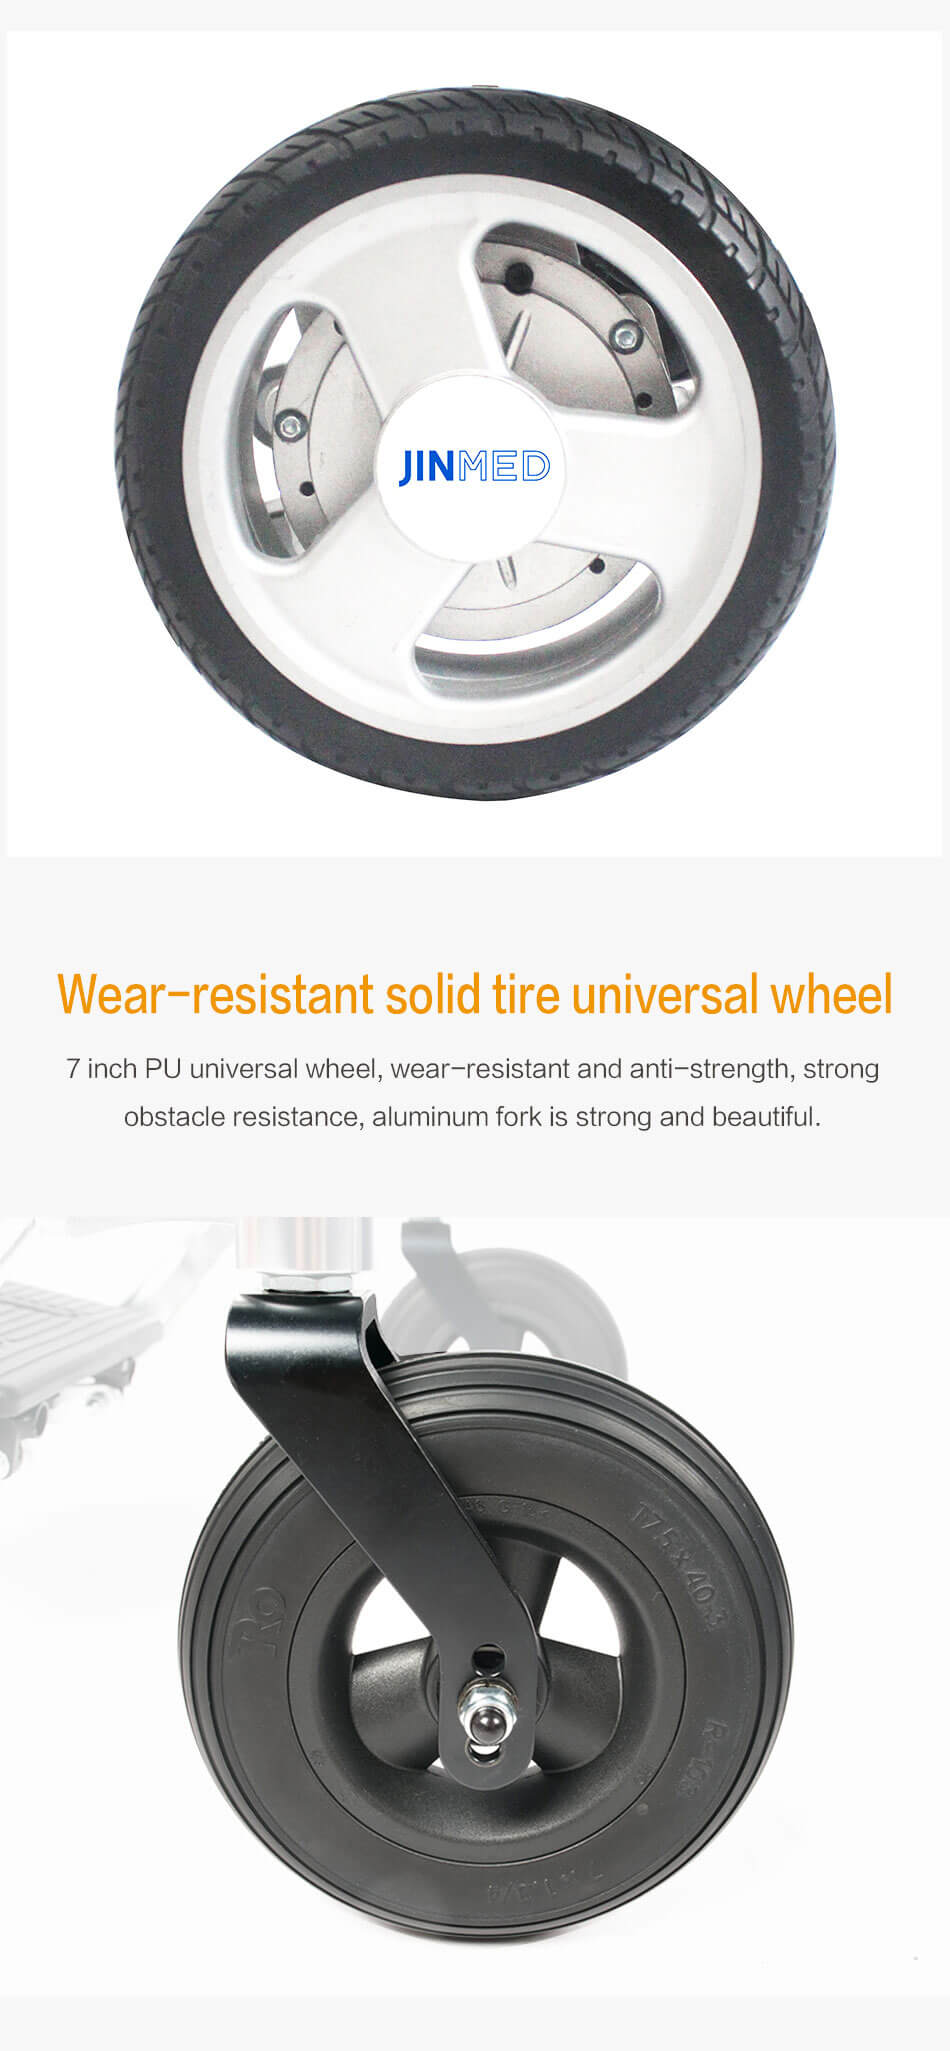  power wheelchair Product details